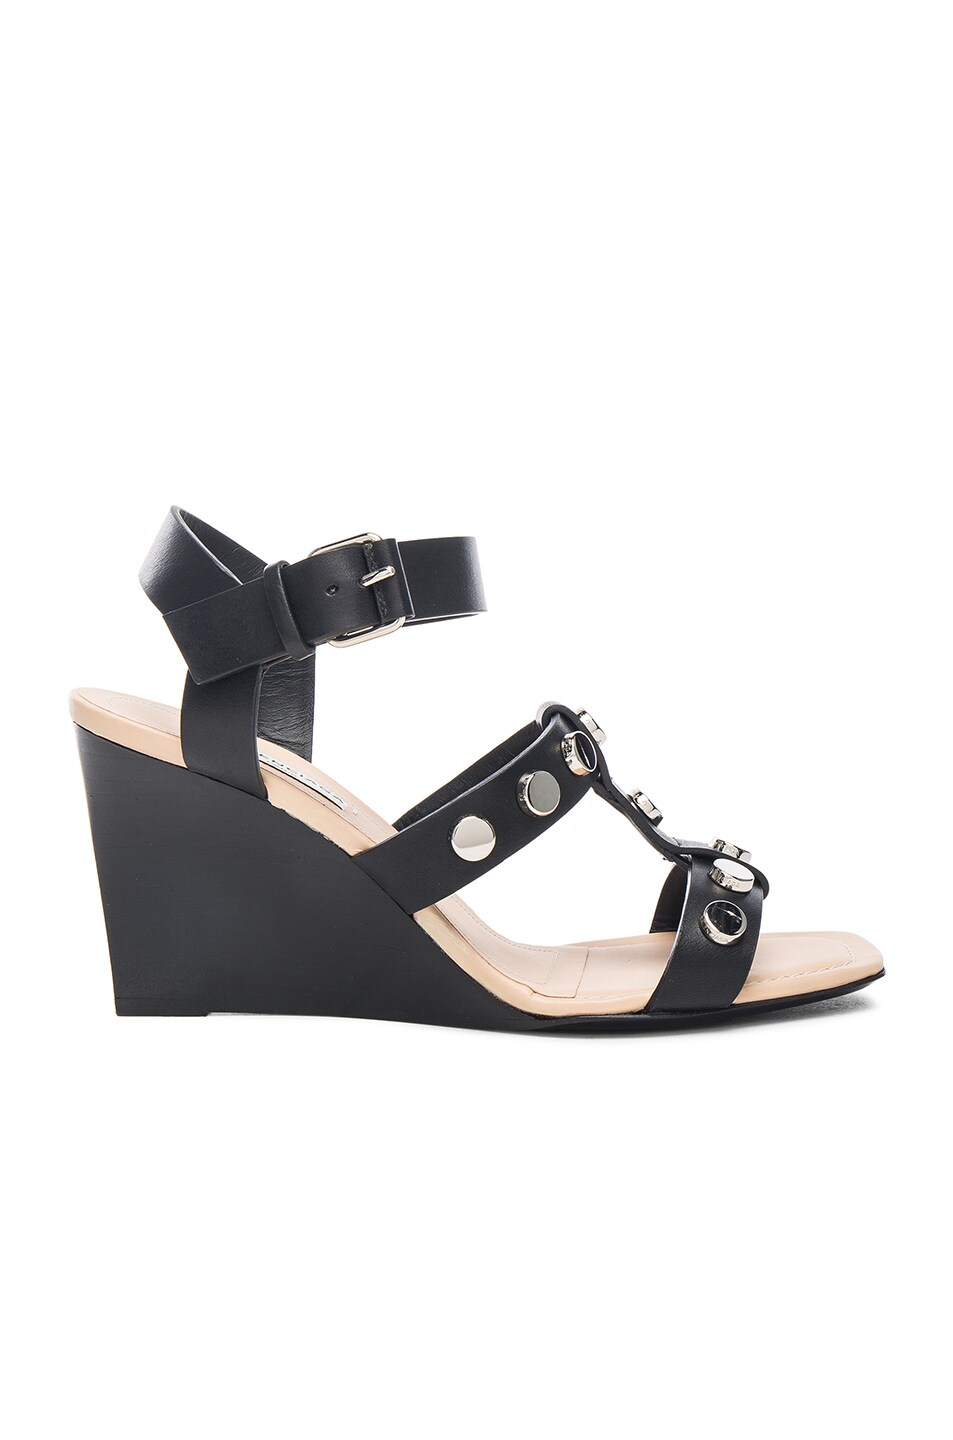 Image 1 of Balenciaga Studded Wedges in Black